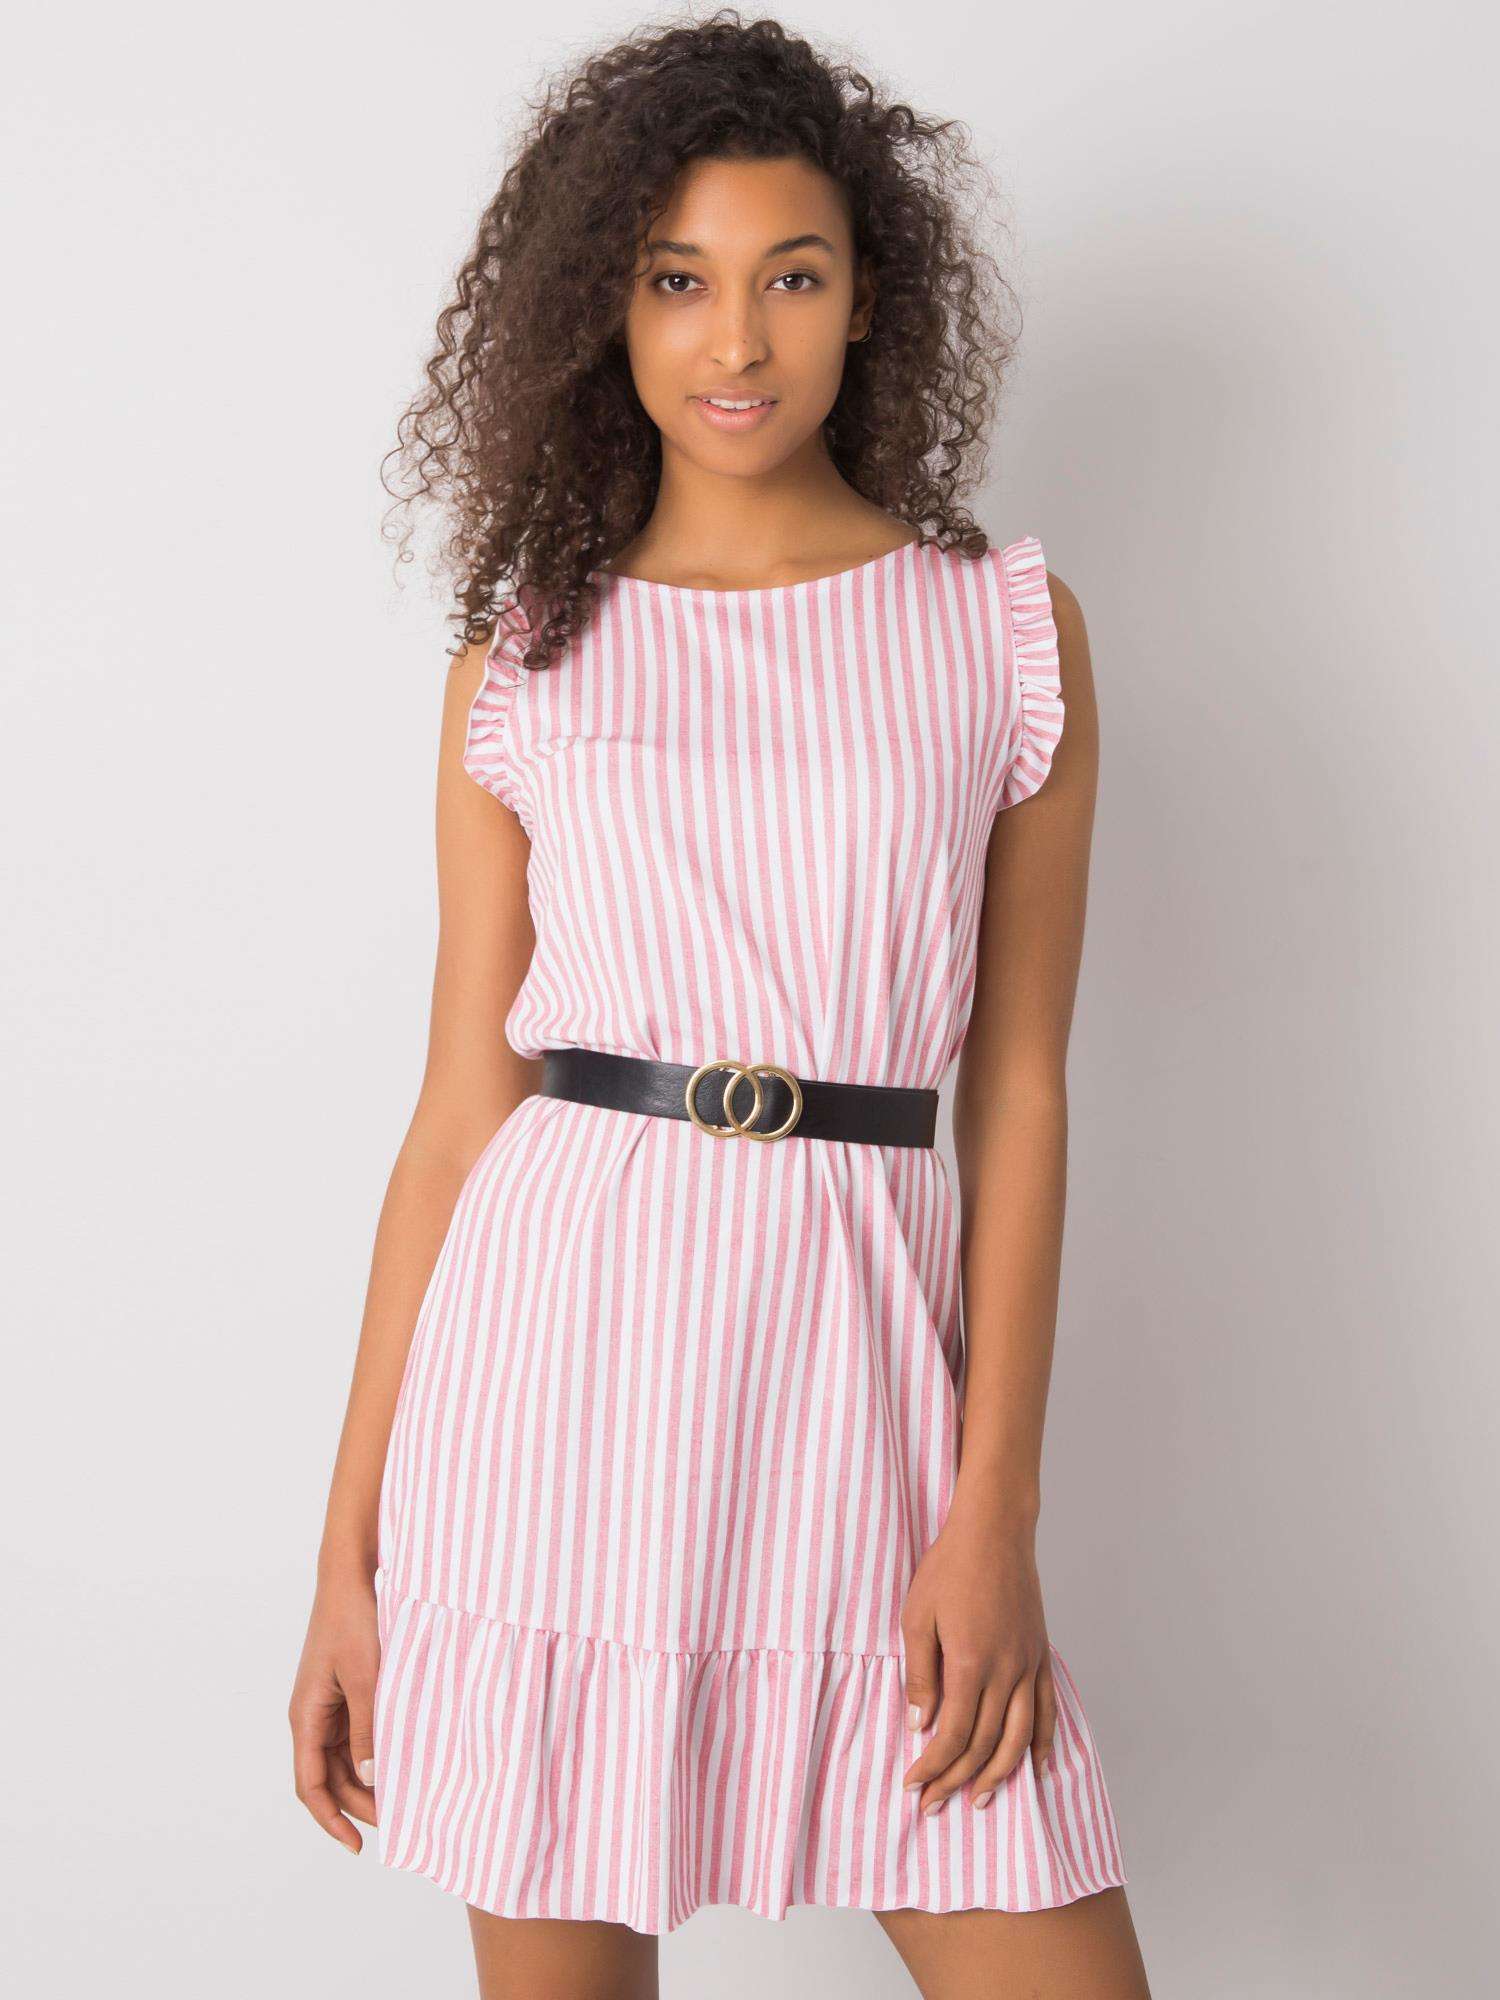 Clarabelle Red Striped Dress